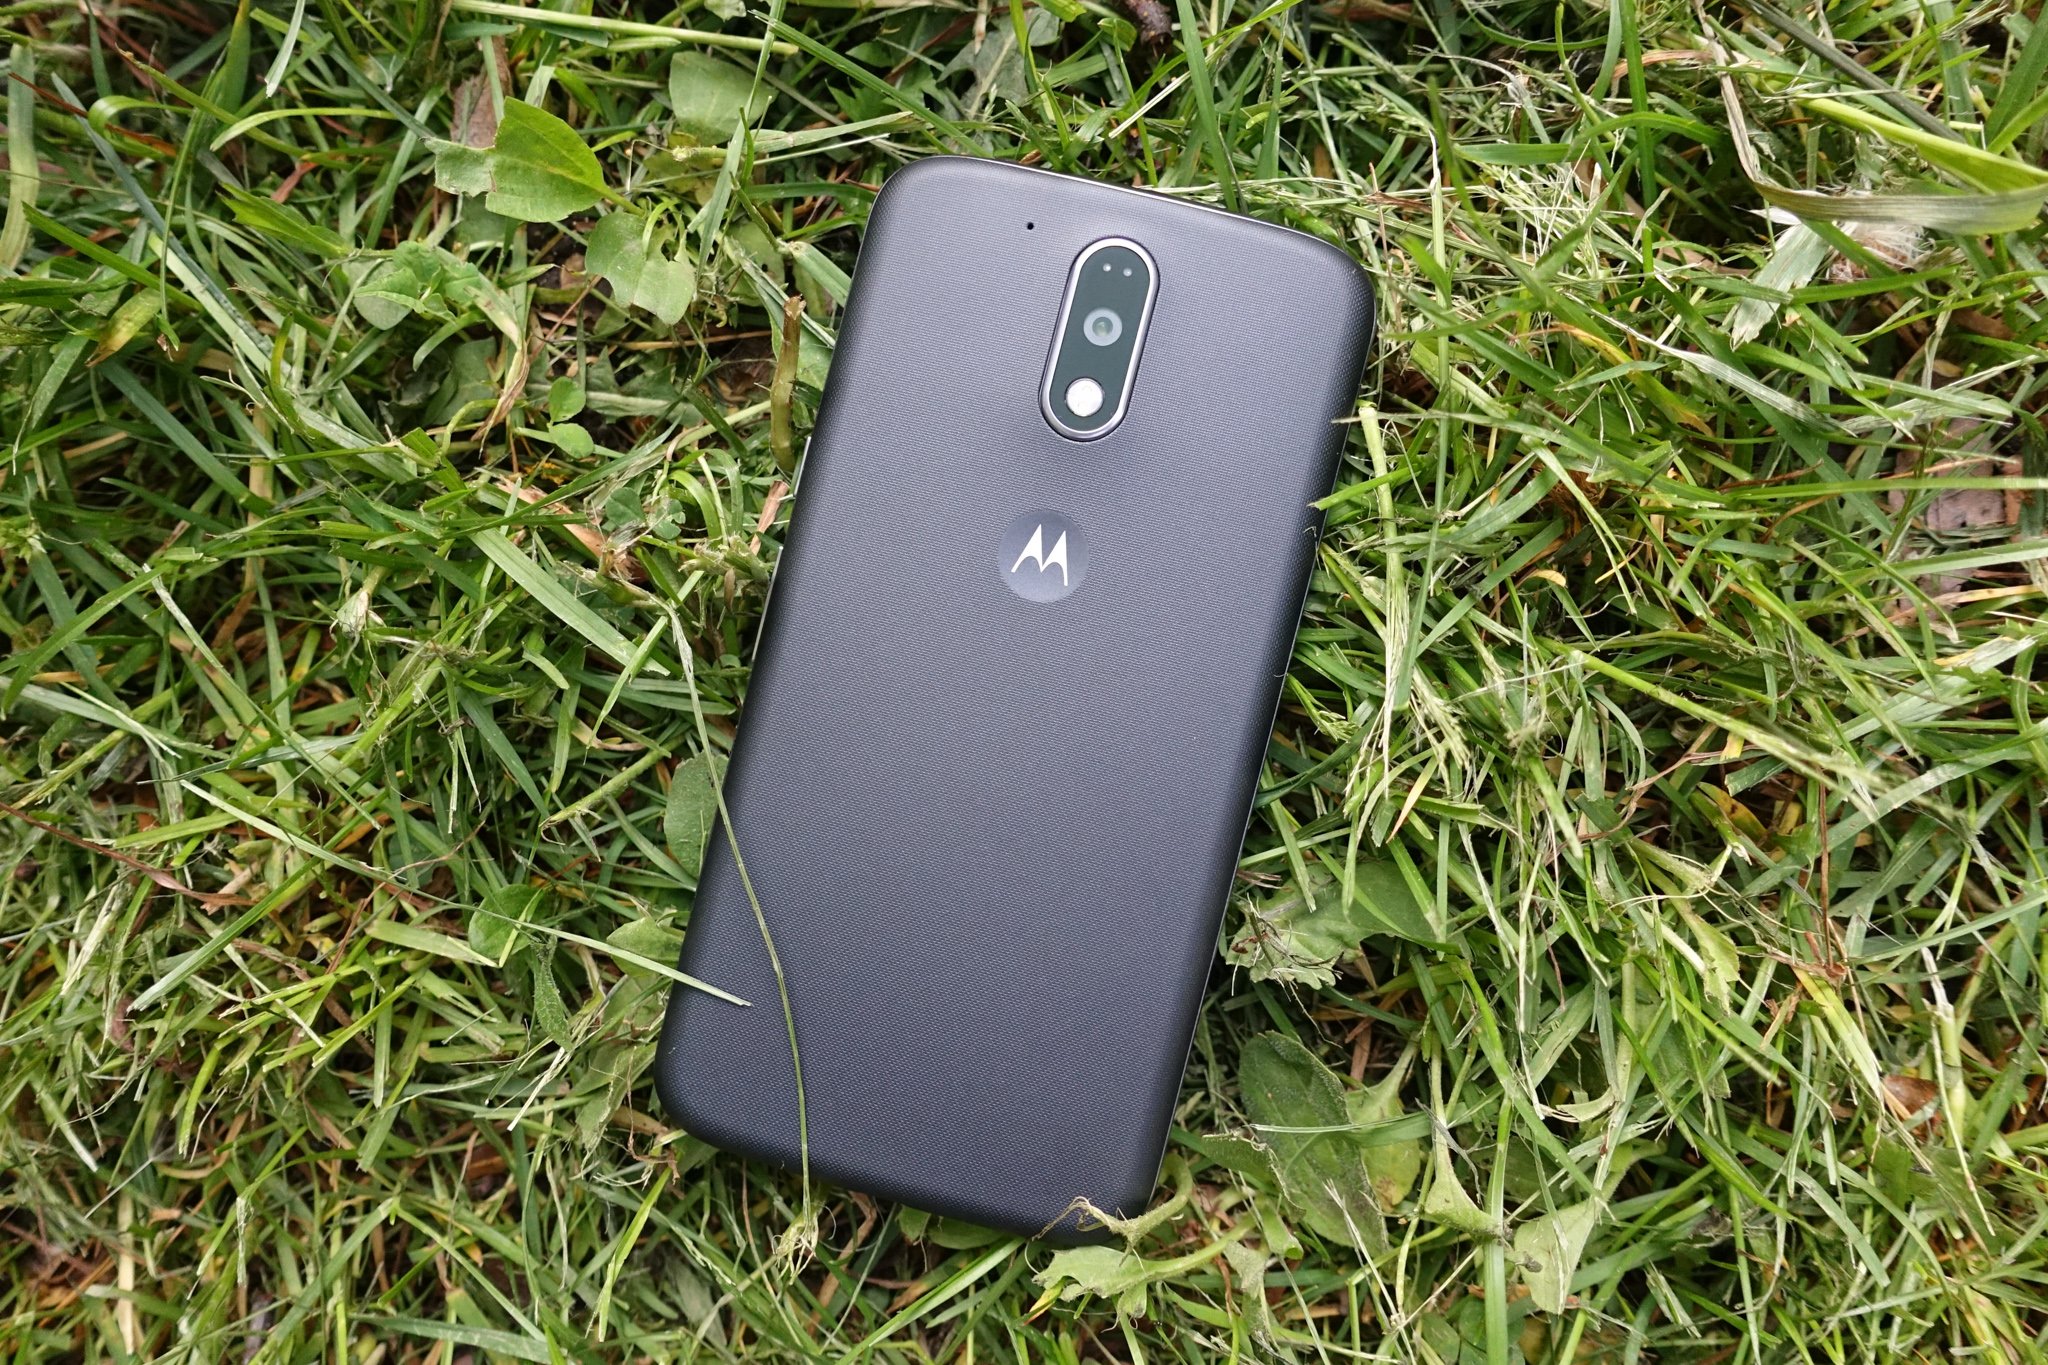 Best Cases Moto G4 and Moto G4 Plus | Android Central